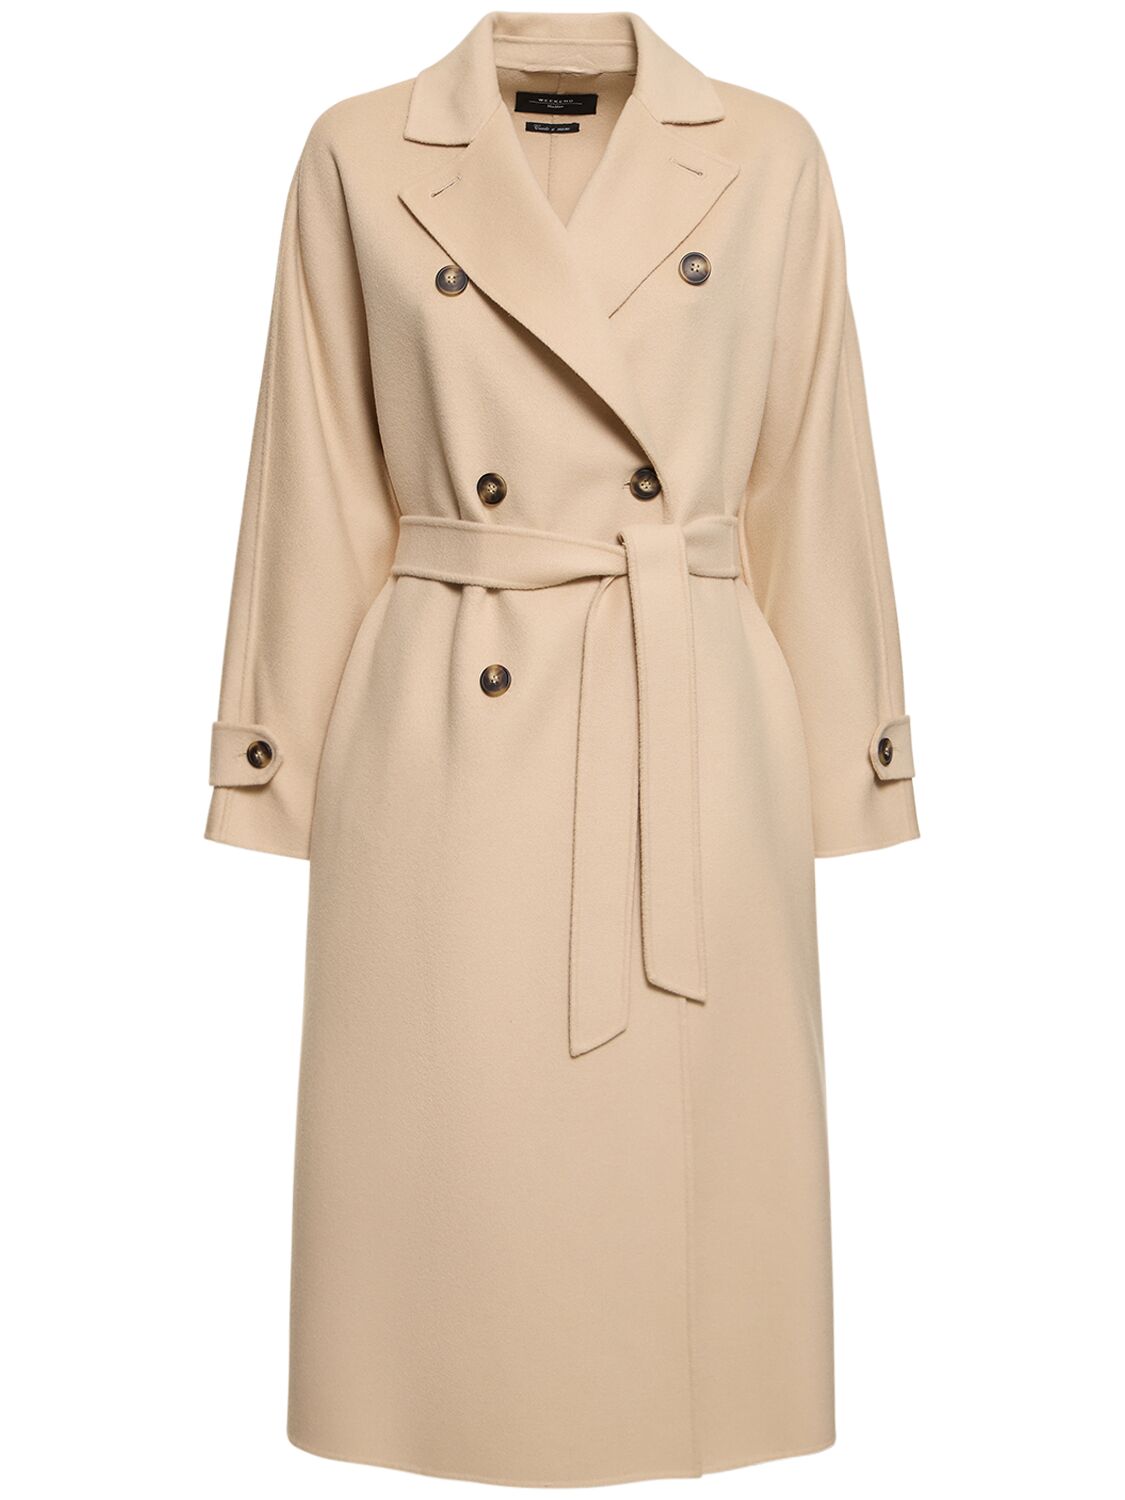 Affetto Long Wool Blend Trench Coat